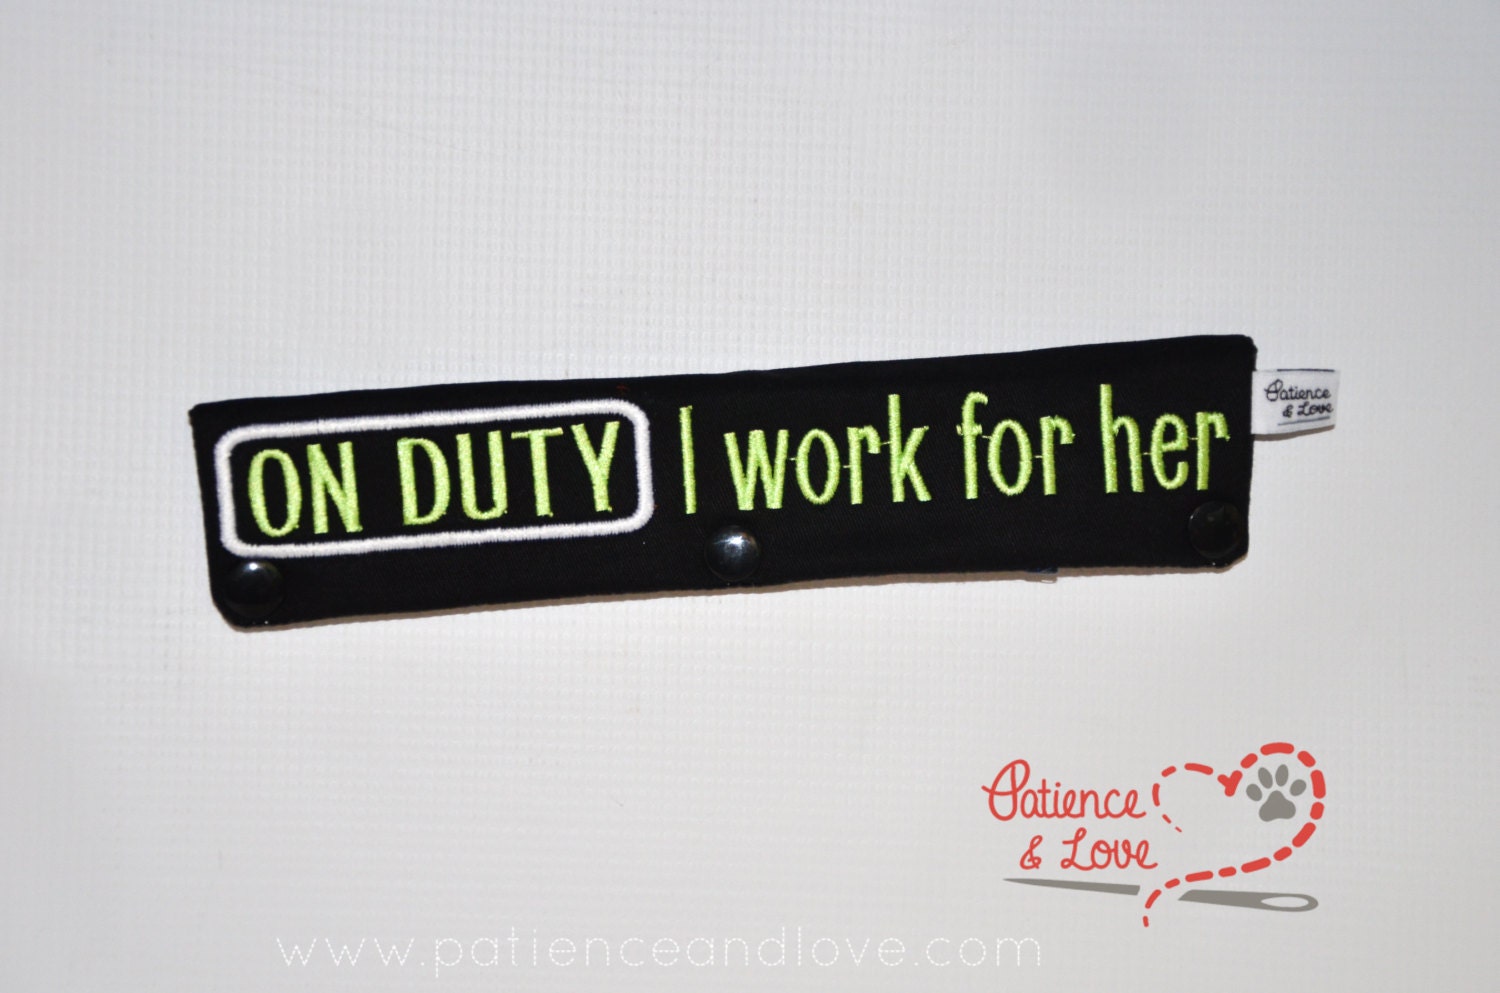 Black Leash sleeve with text that says ON DUTY I work for her.  the text is in an apple green and the on duty text is circled in white thread.